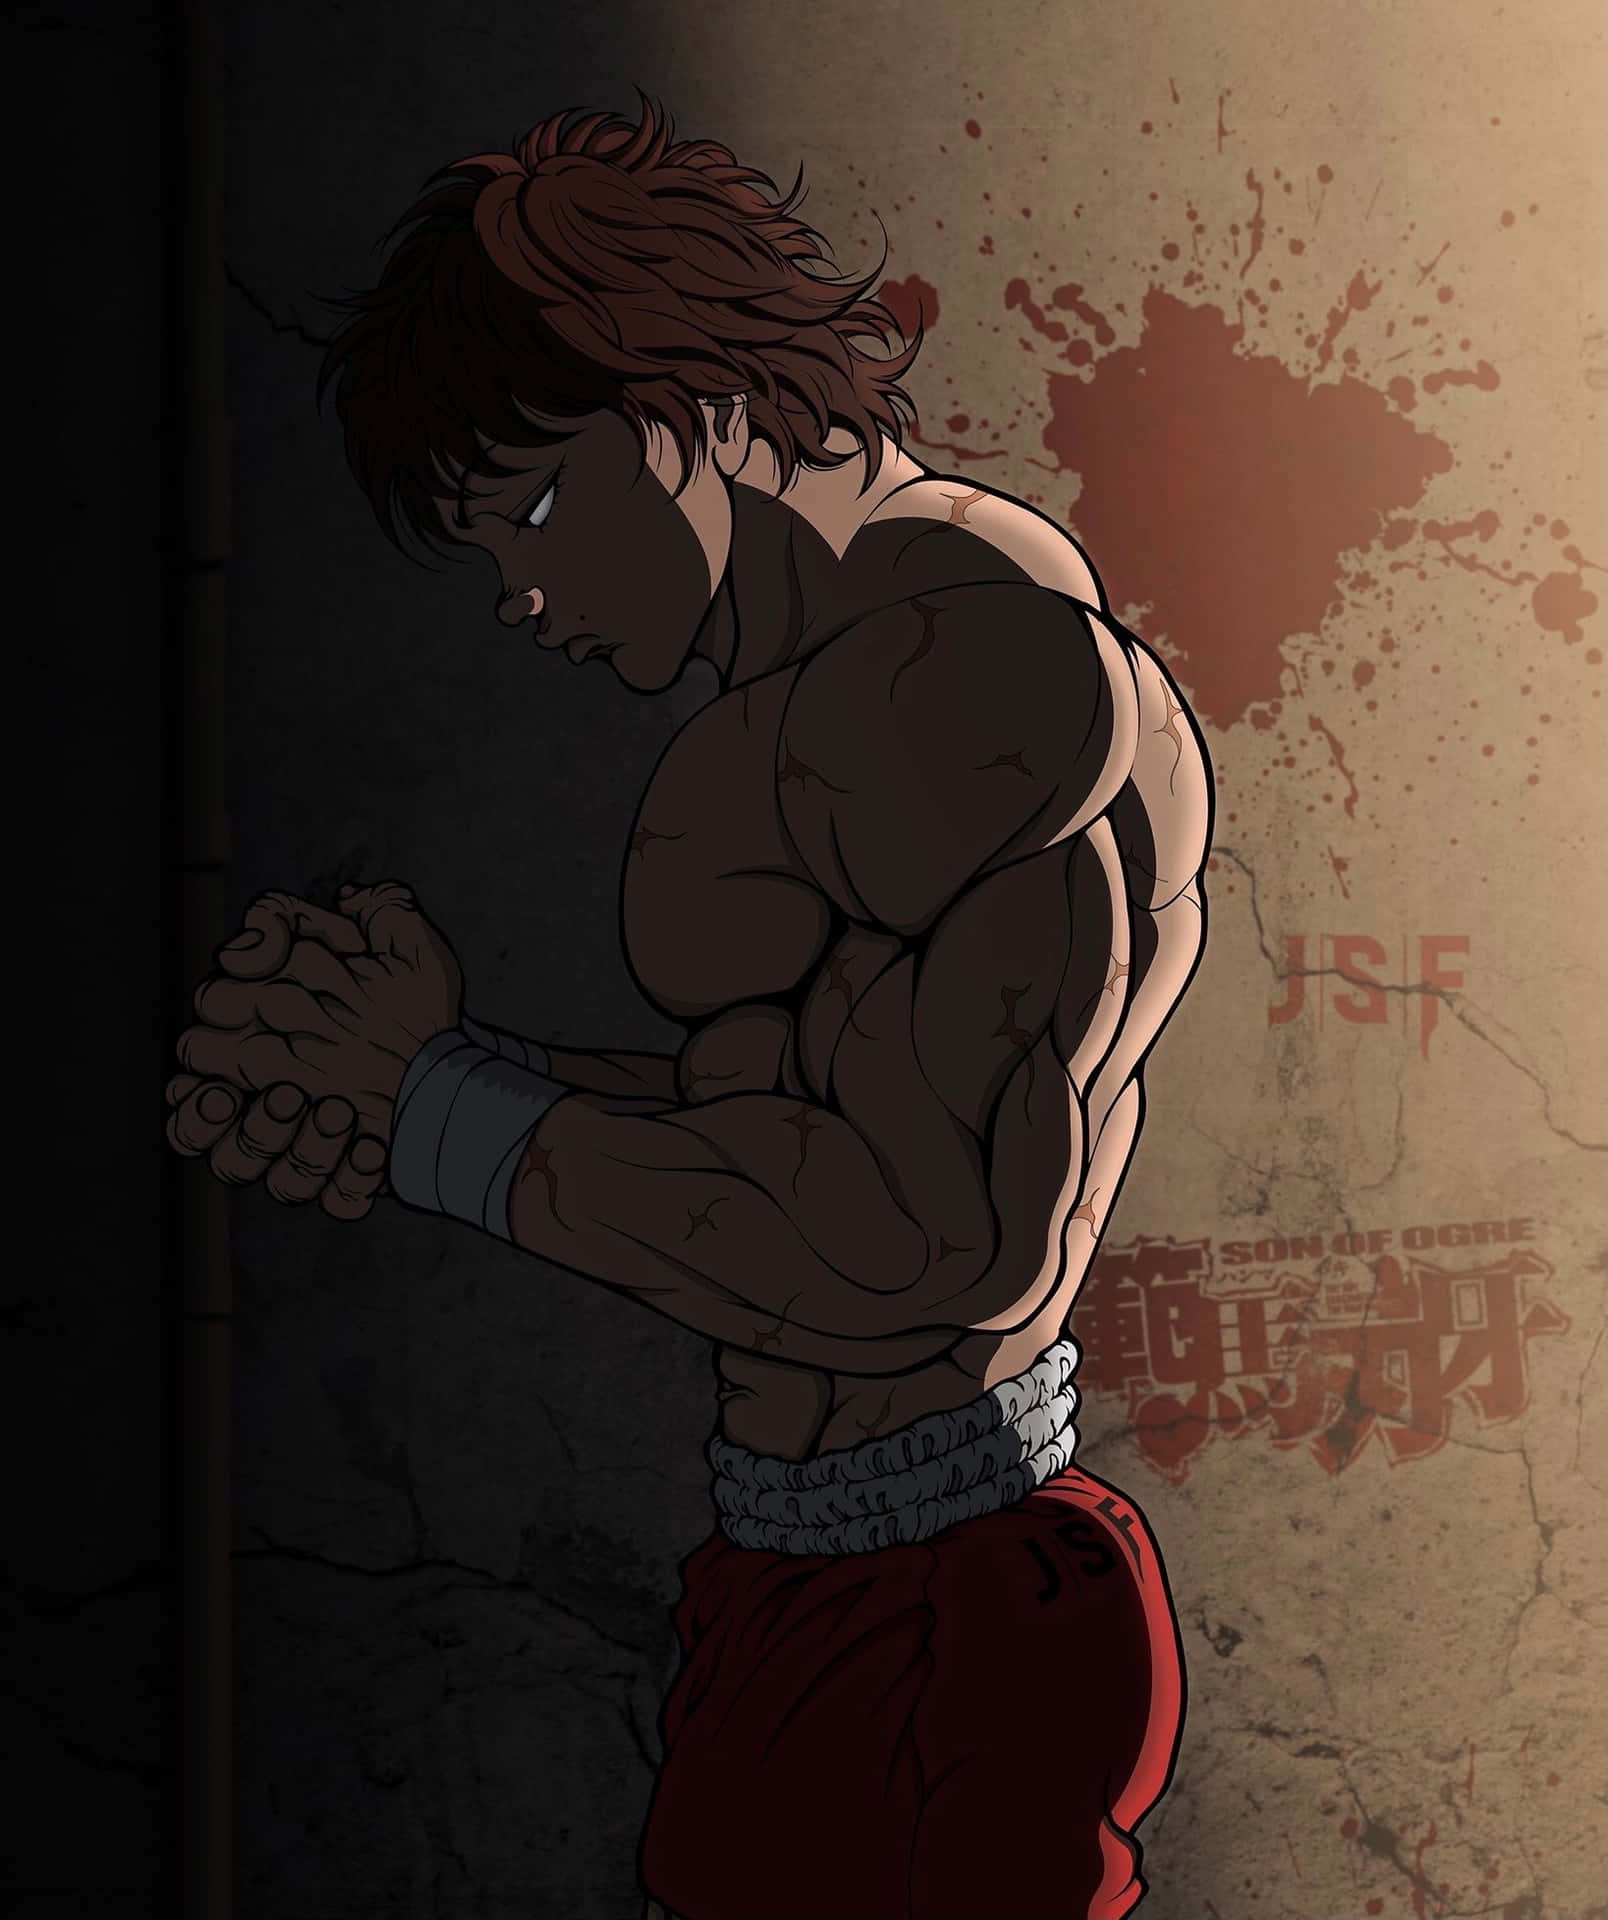 Baki Hanma stands victorious in the arena.